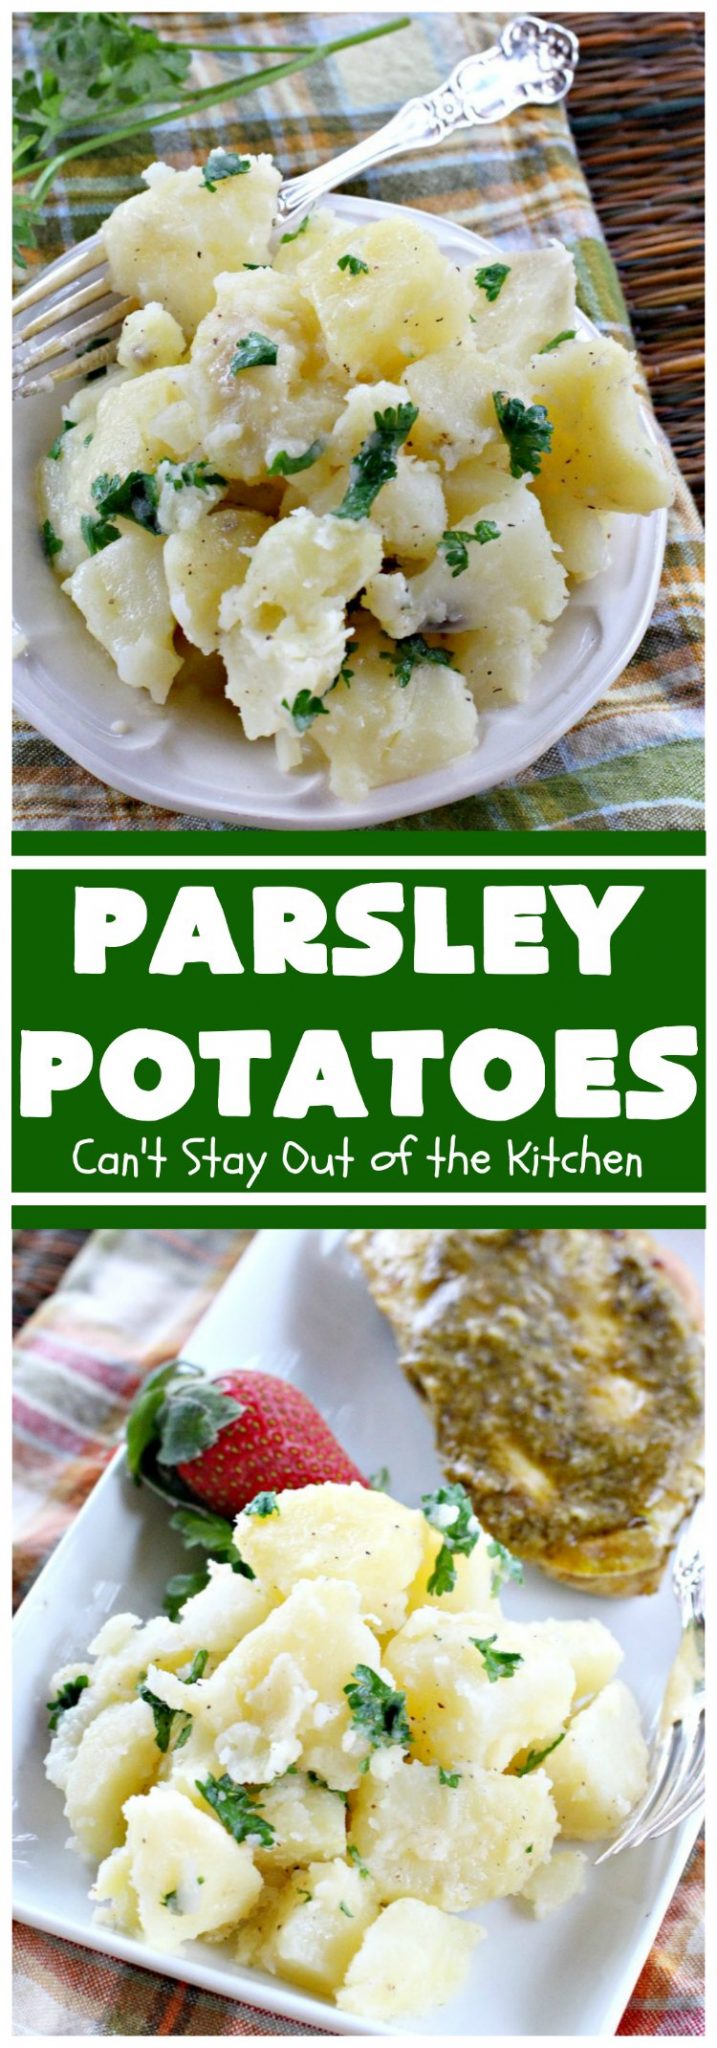 Parsley Potatoes – Can't Stay Out of the Kitchen